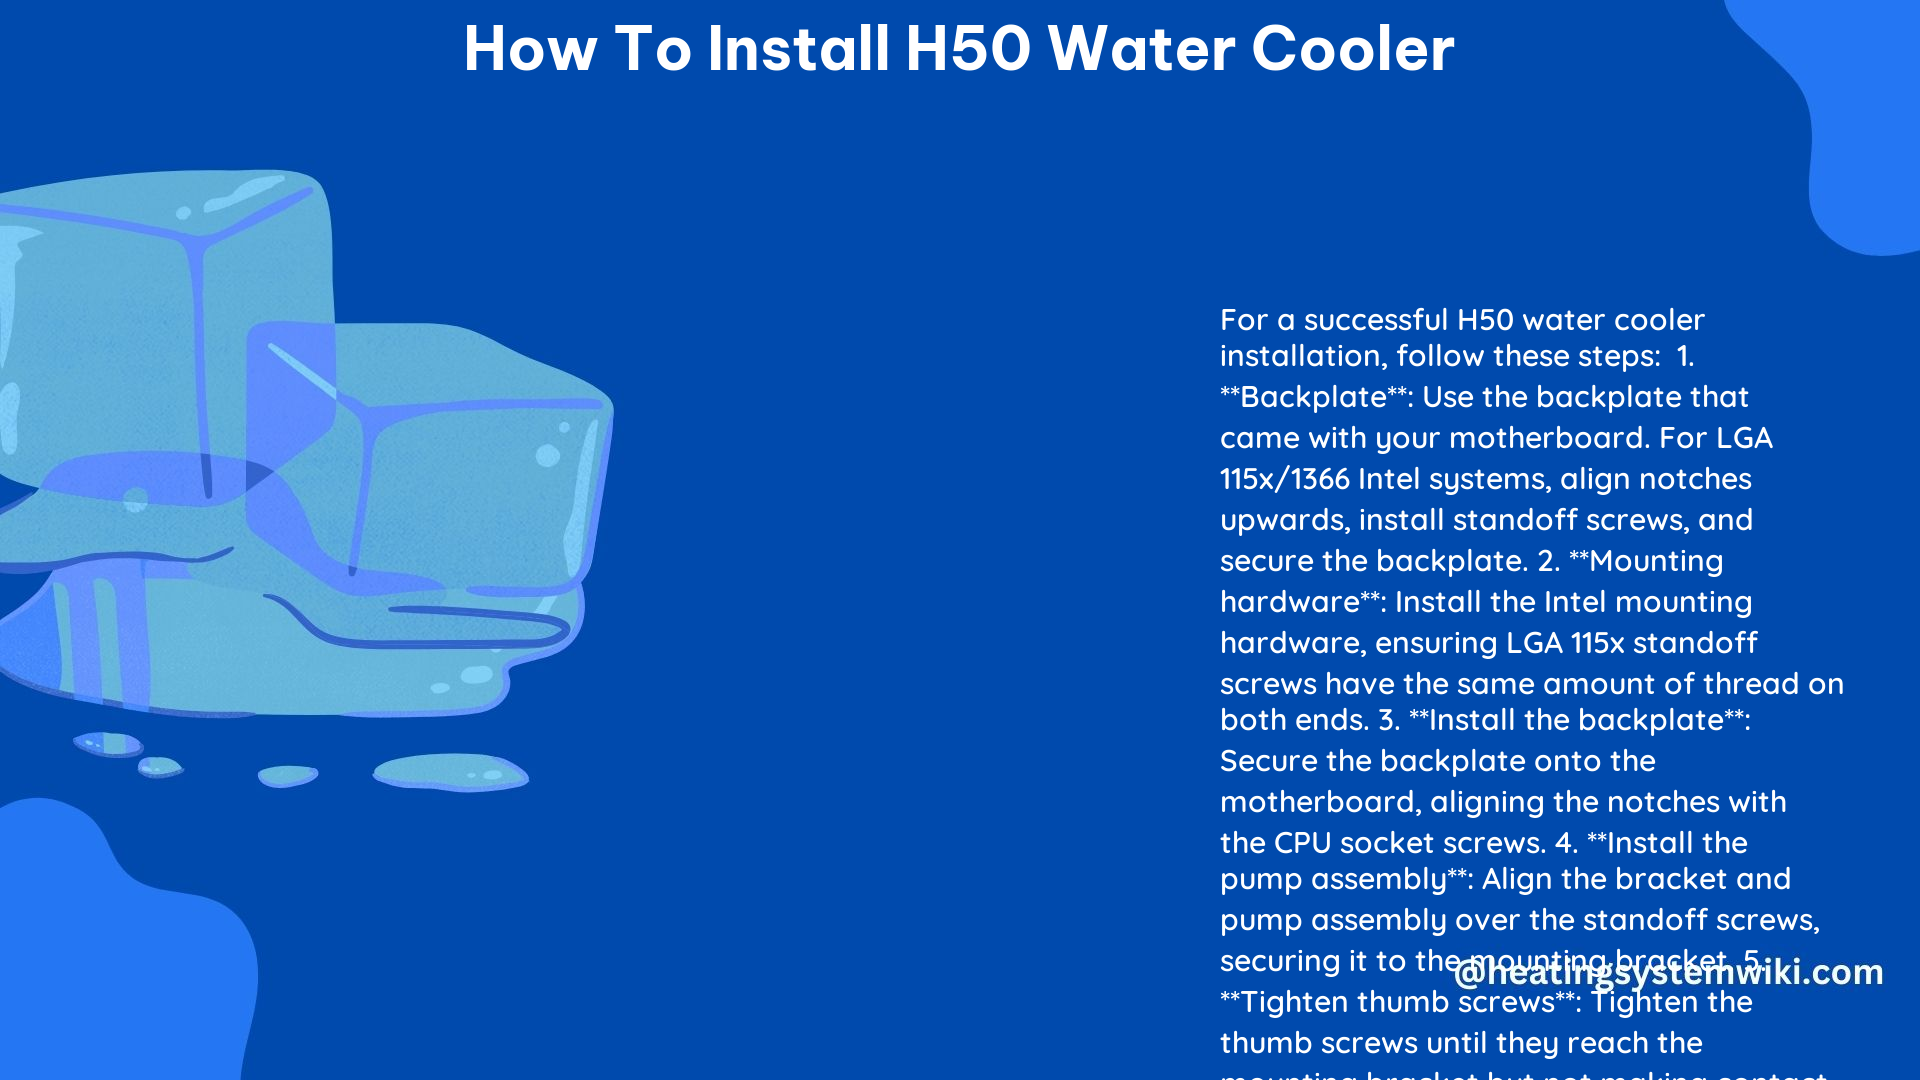 How to Install H50 Water Cooler